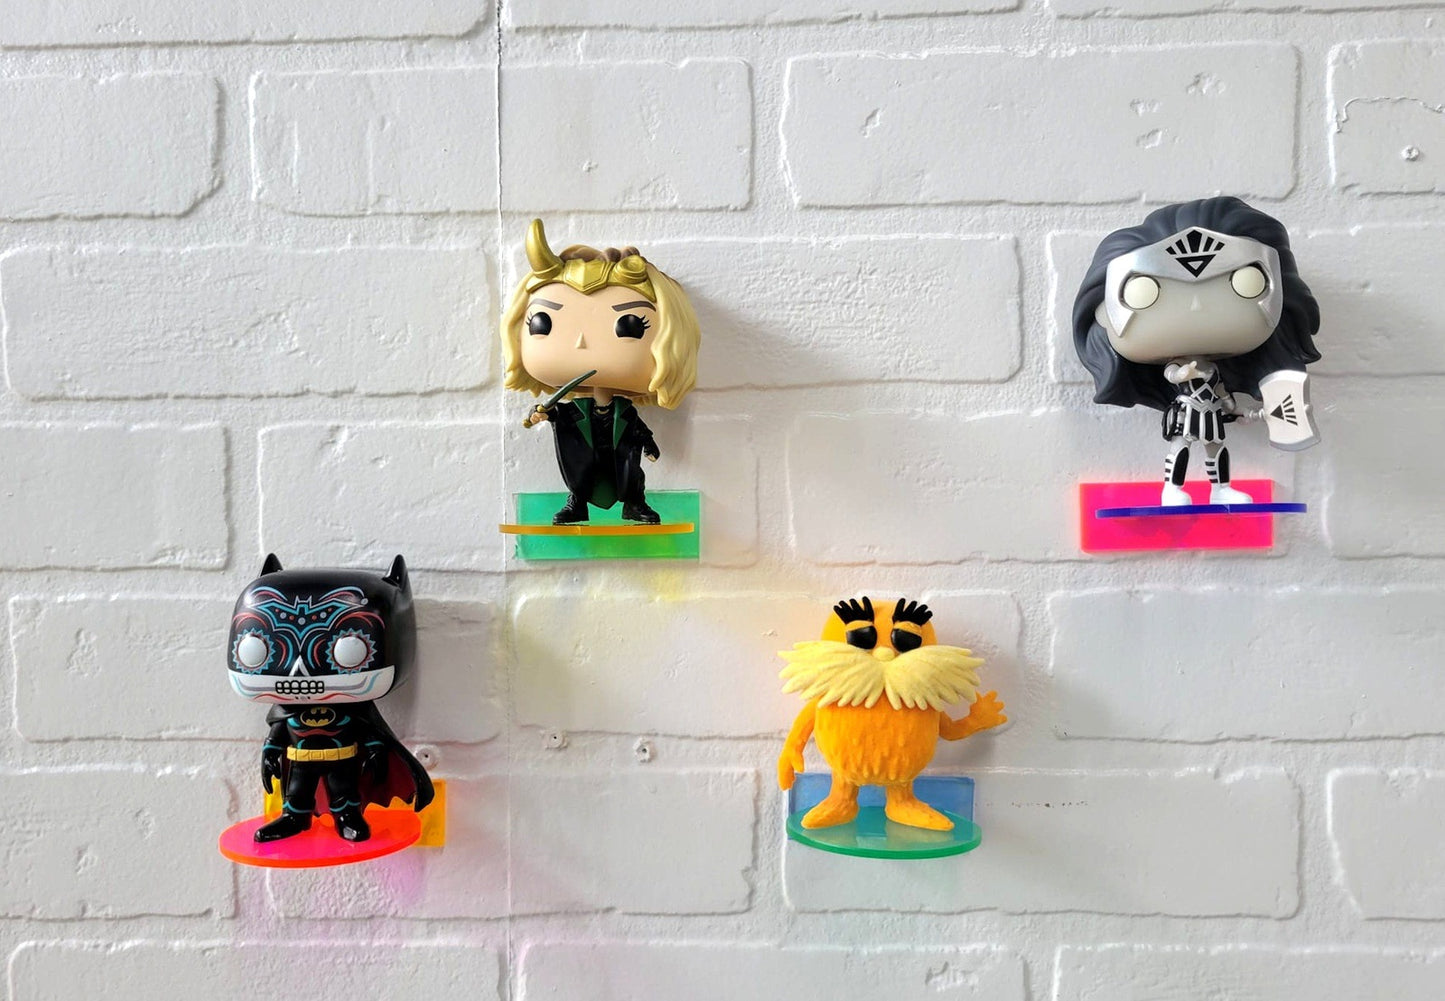 Funko Pop Vinyl and Funko Pin: Acrylic Wall Stand, Stick On, Single Shelf Neon Colors Mix and Match